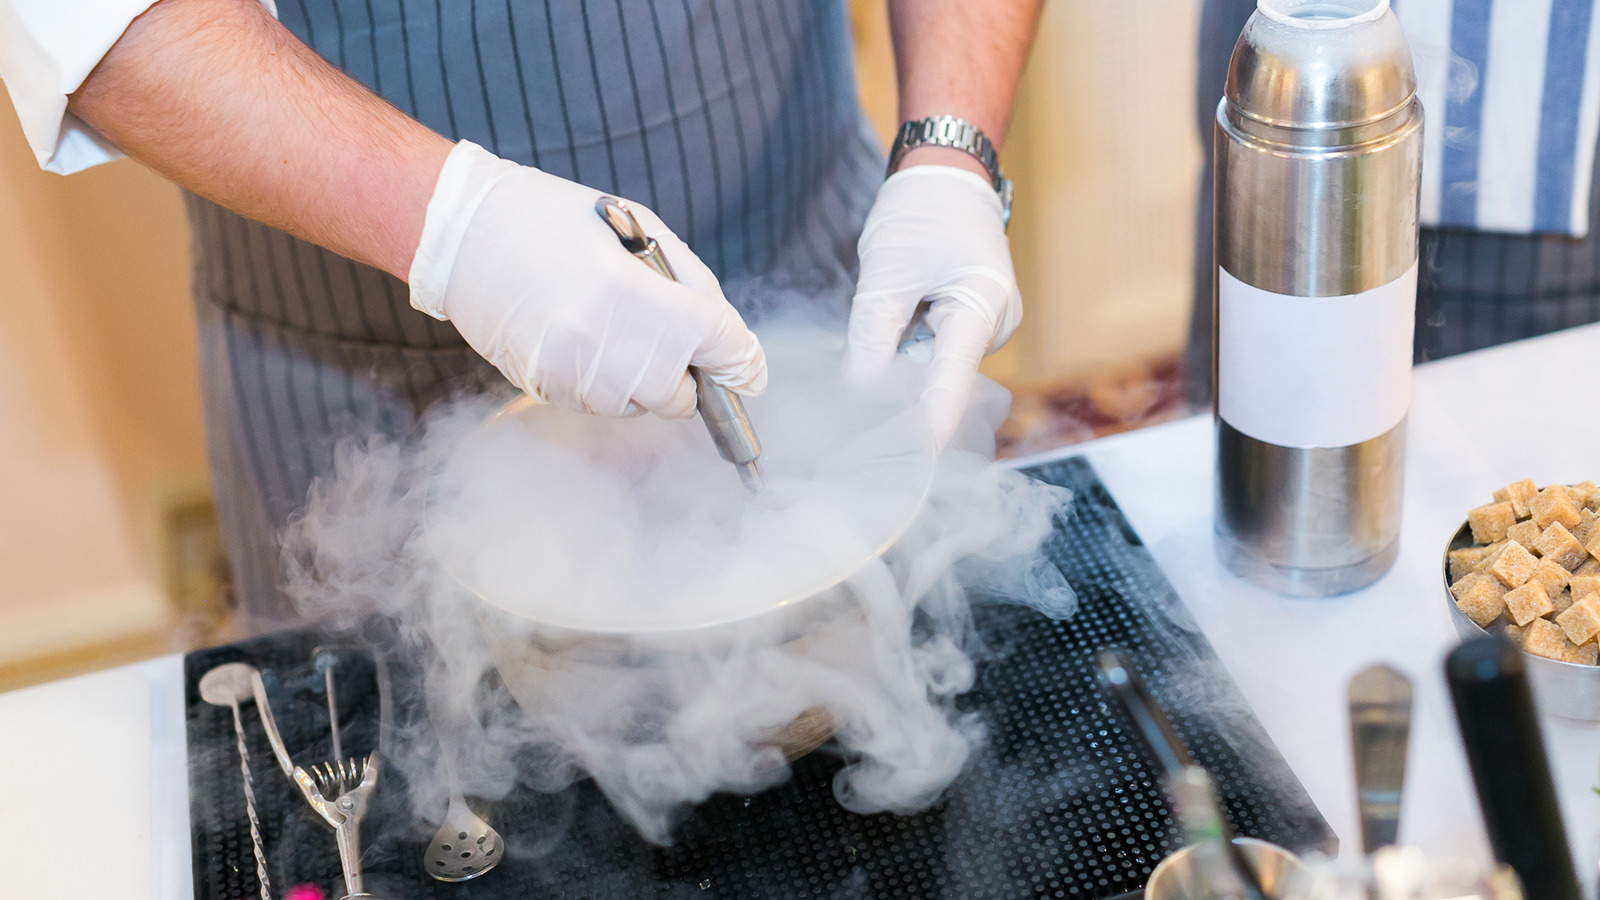 Where To Buy Liquid Nitrogen For Cooking?